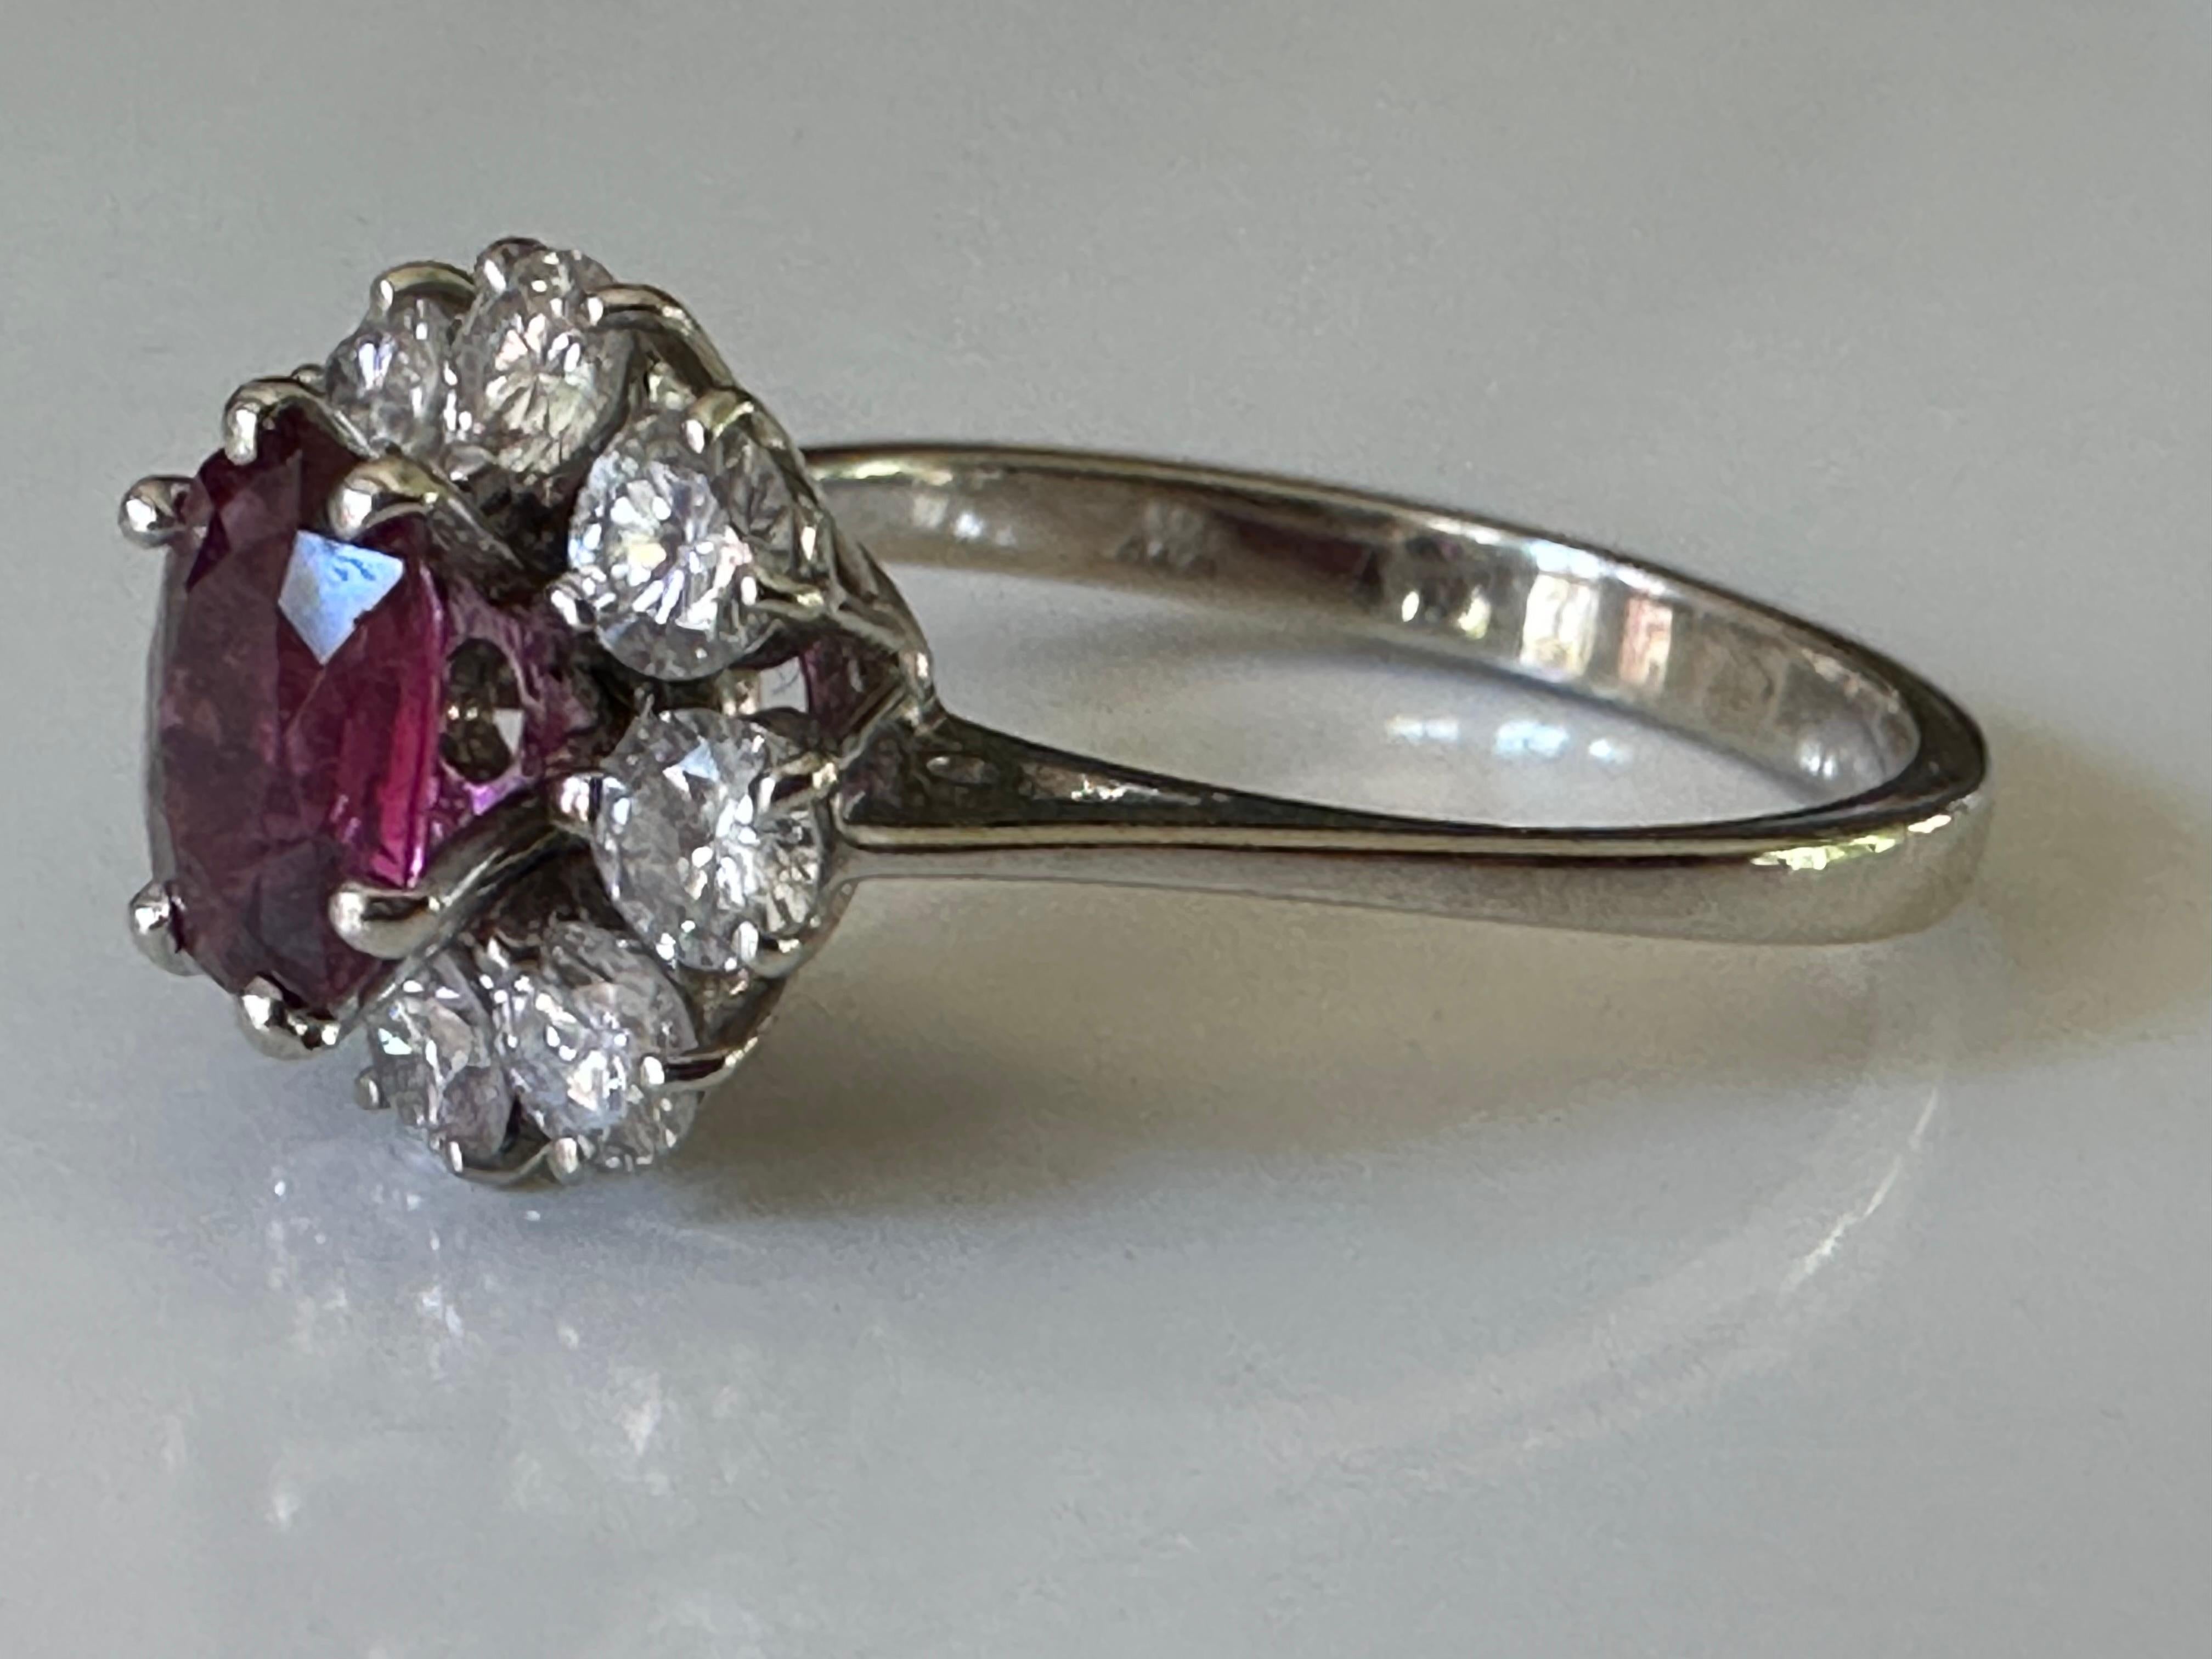 A natural oval Thai ruby measuring approximately 0.90 carats centers this exquisite mid-century ring surrounded by a floral halo of eight round brilliant-cut diamonds totaling approximately 0.56 carats. Circa 1950s. Set in 18K white gold. 

